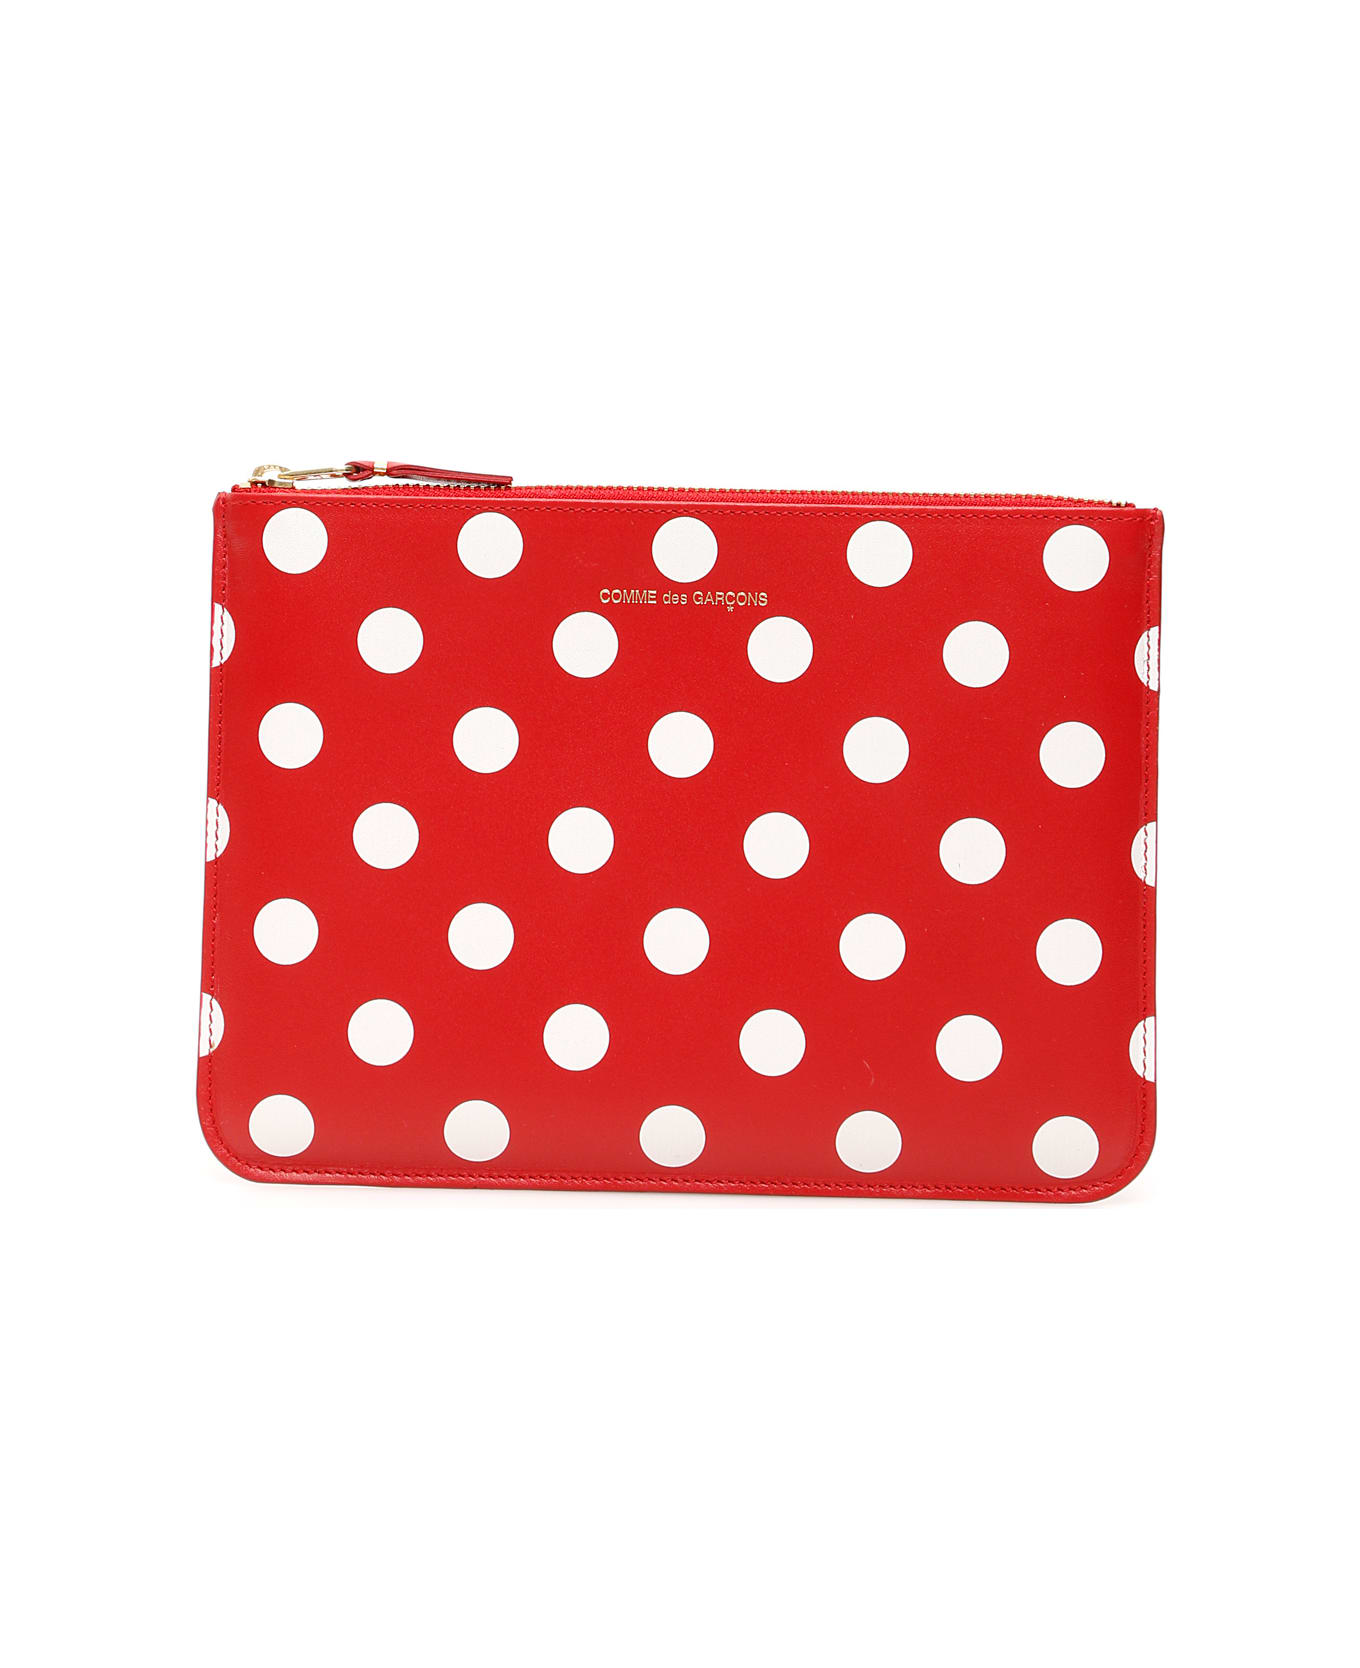 Comme des Garçons Wallet Polka Dots Pouch - Red Red